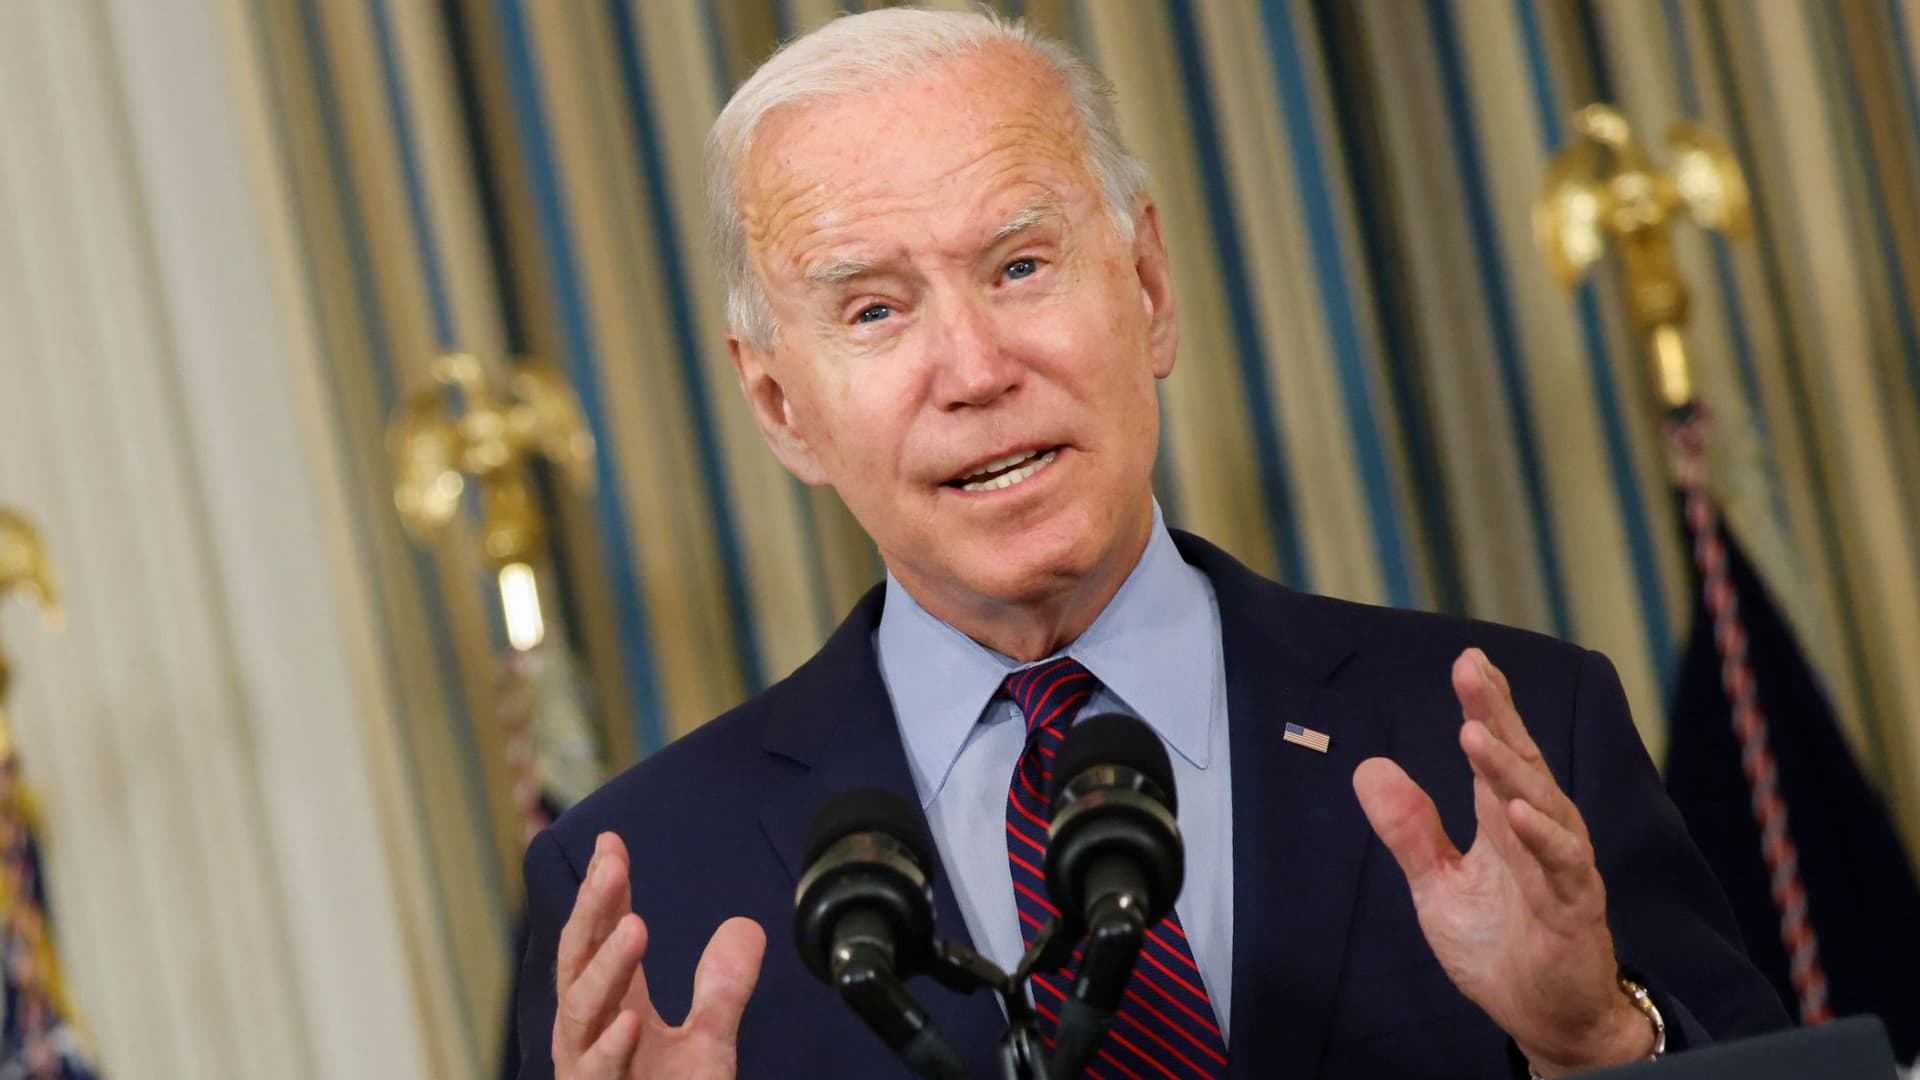 Watch live: Biden speaks about the state of the U.S. economy